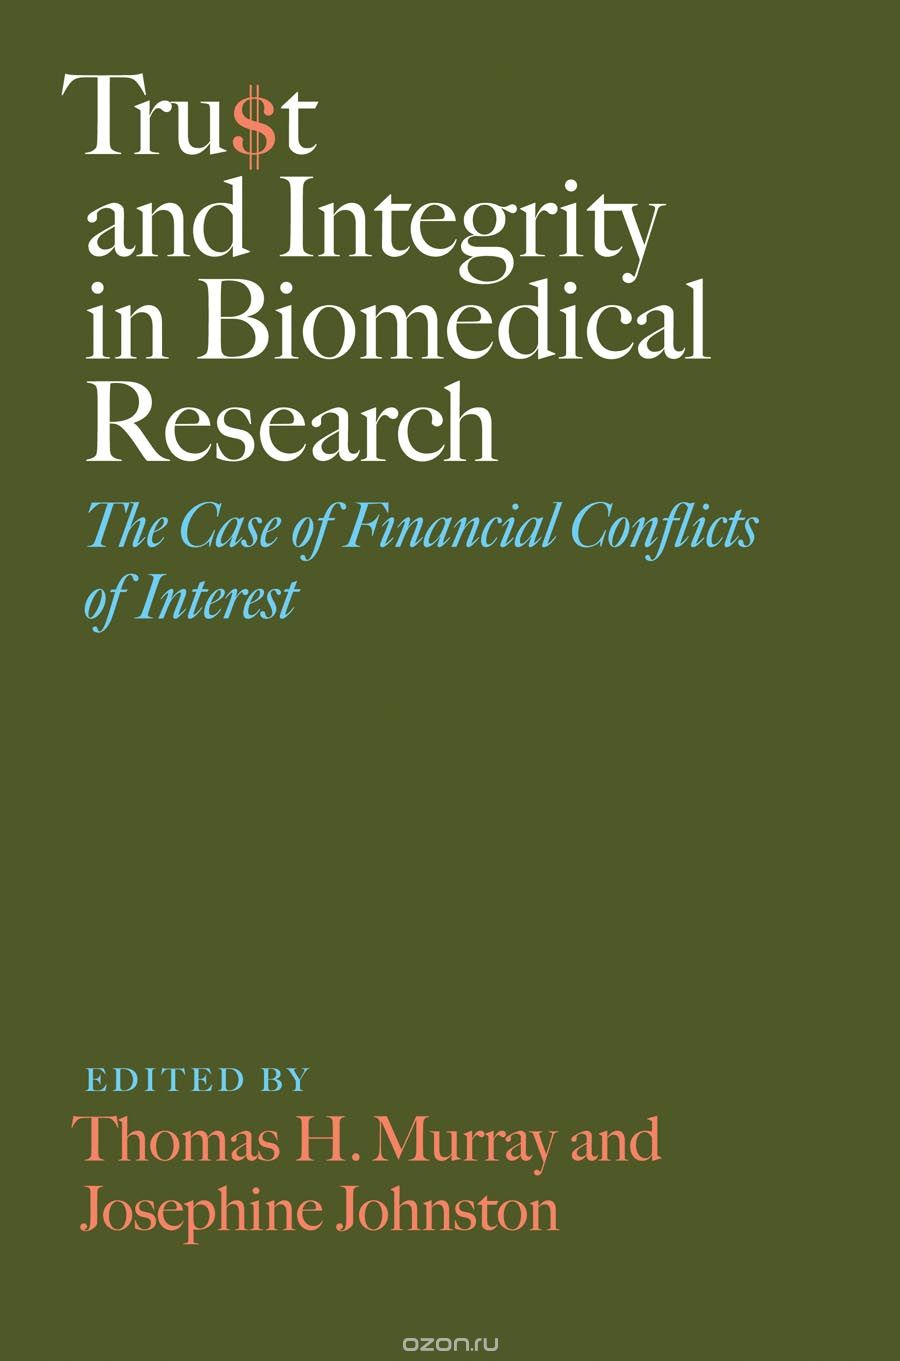 Trust and Integrity in Biomedical Research – The Case of Financial Conflicts of Interest